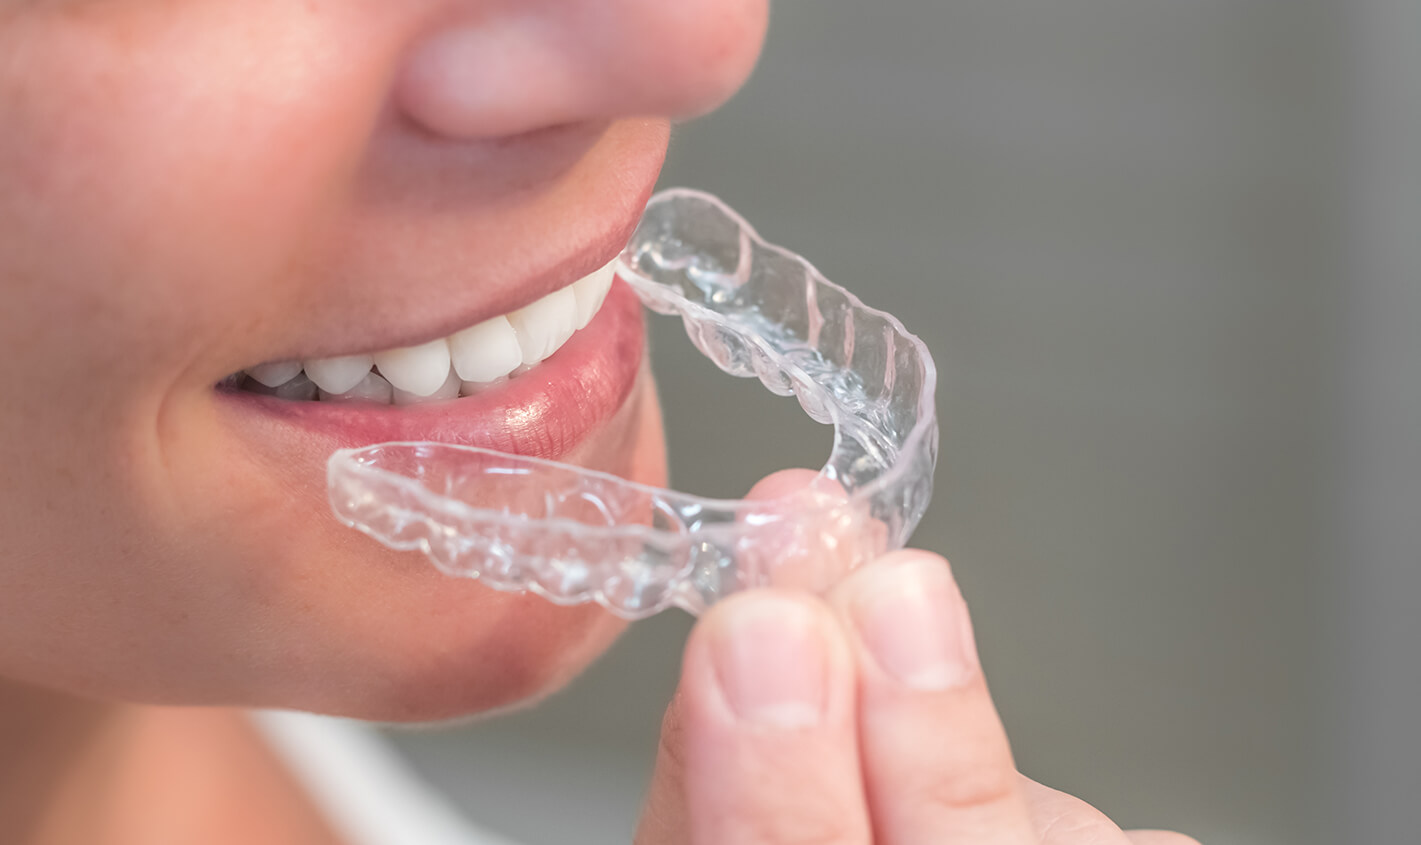 Invisalign Is A Leader In Clear Orthodontics, But What Sets It Apart From Competitors?